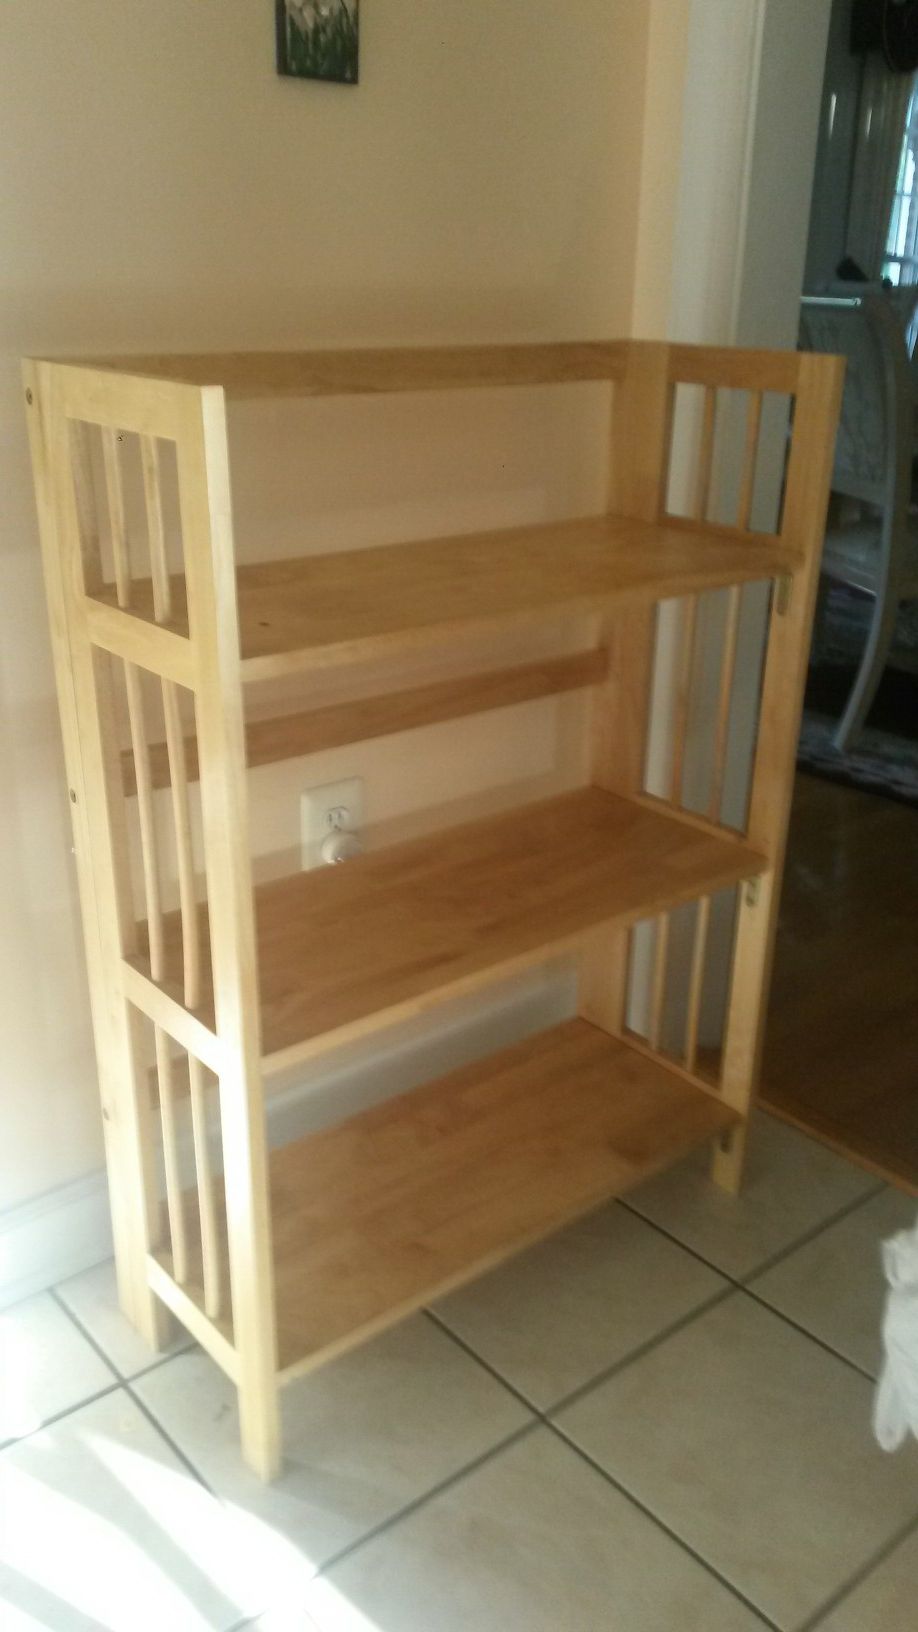 New Beautiful solid maple wood shelves